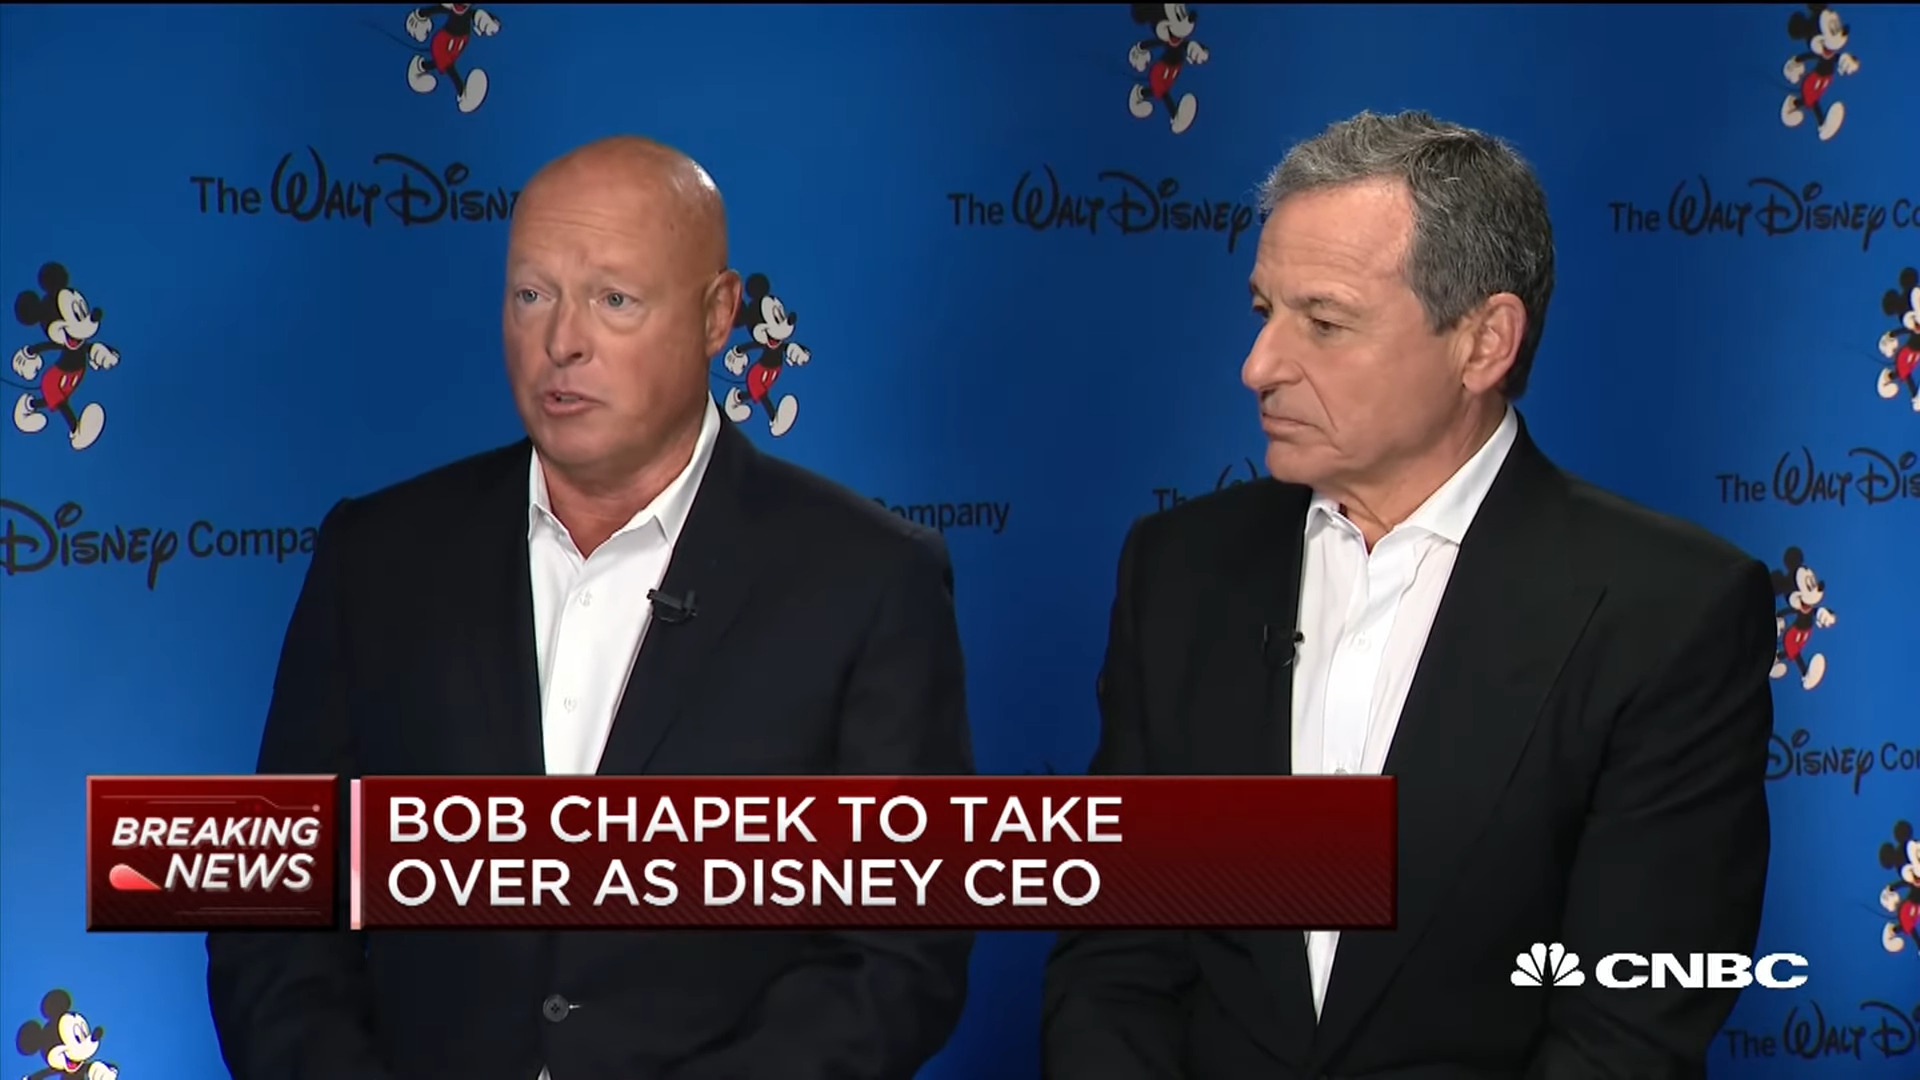 Bob Chapek talks about his plans for his then-upcoming tenure as Disney CEO in Disney's new CEO Bob Chapek: I will follow path laid by Bob Iger via YouTube